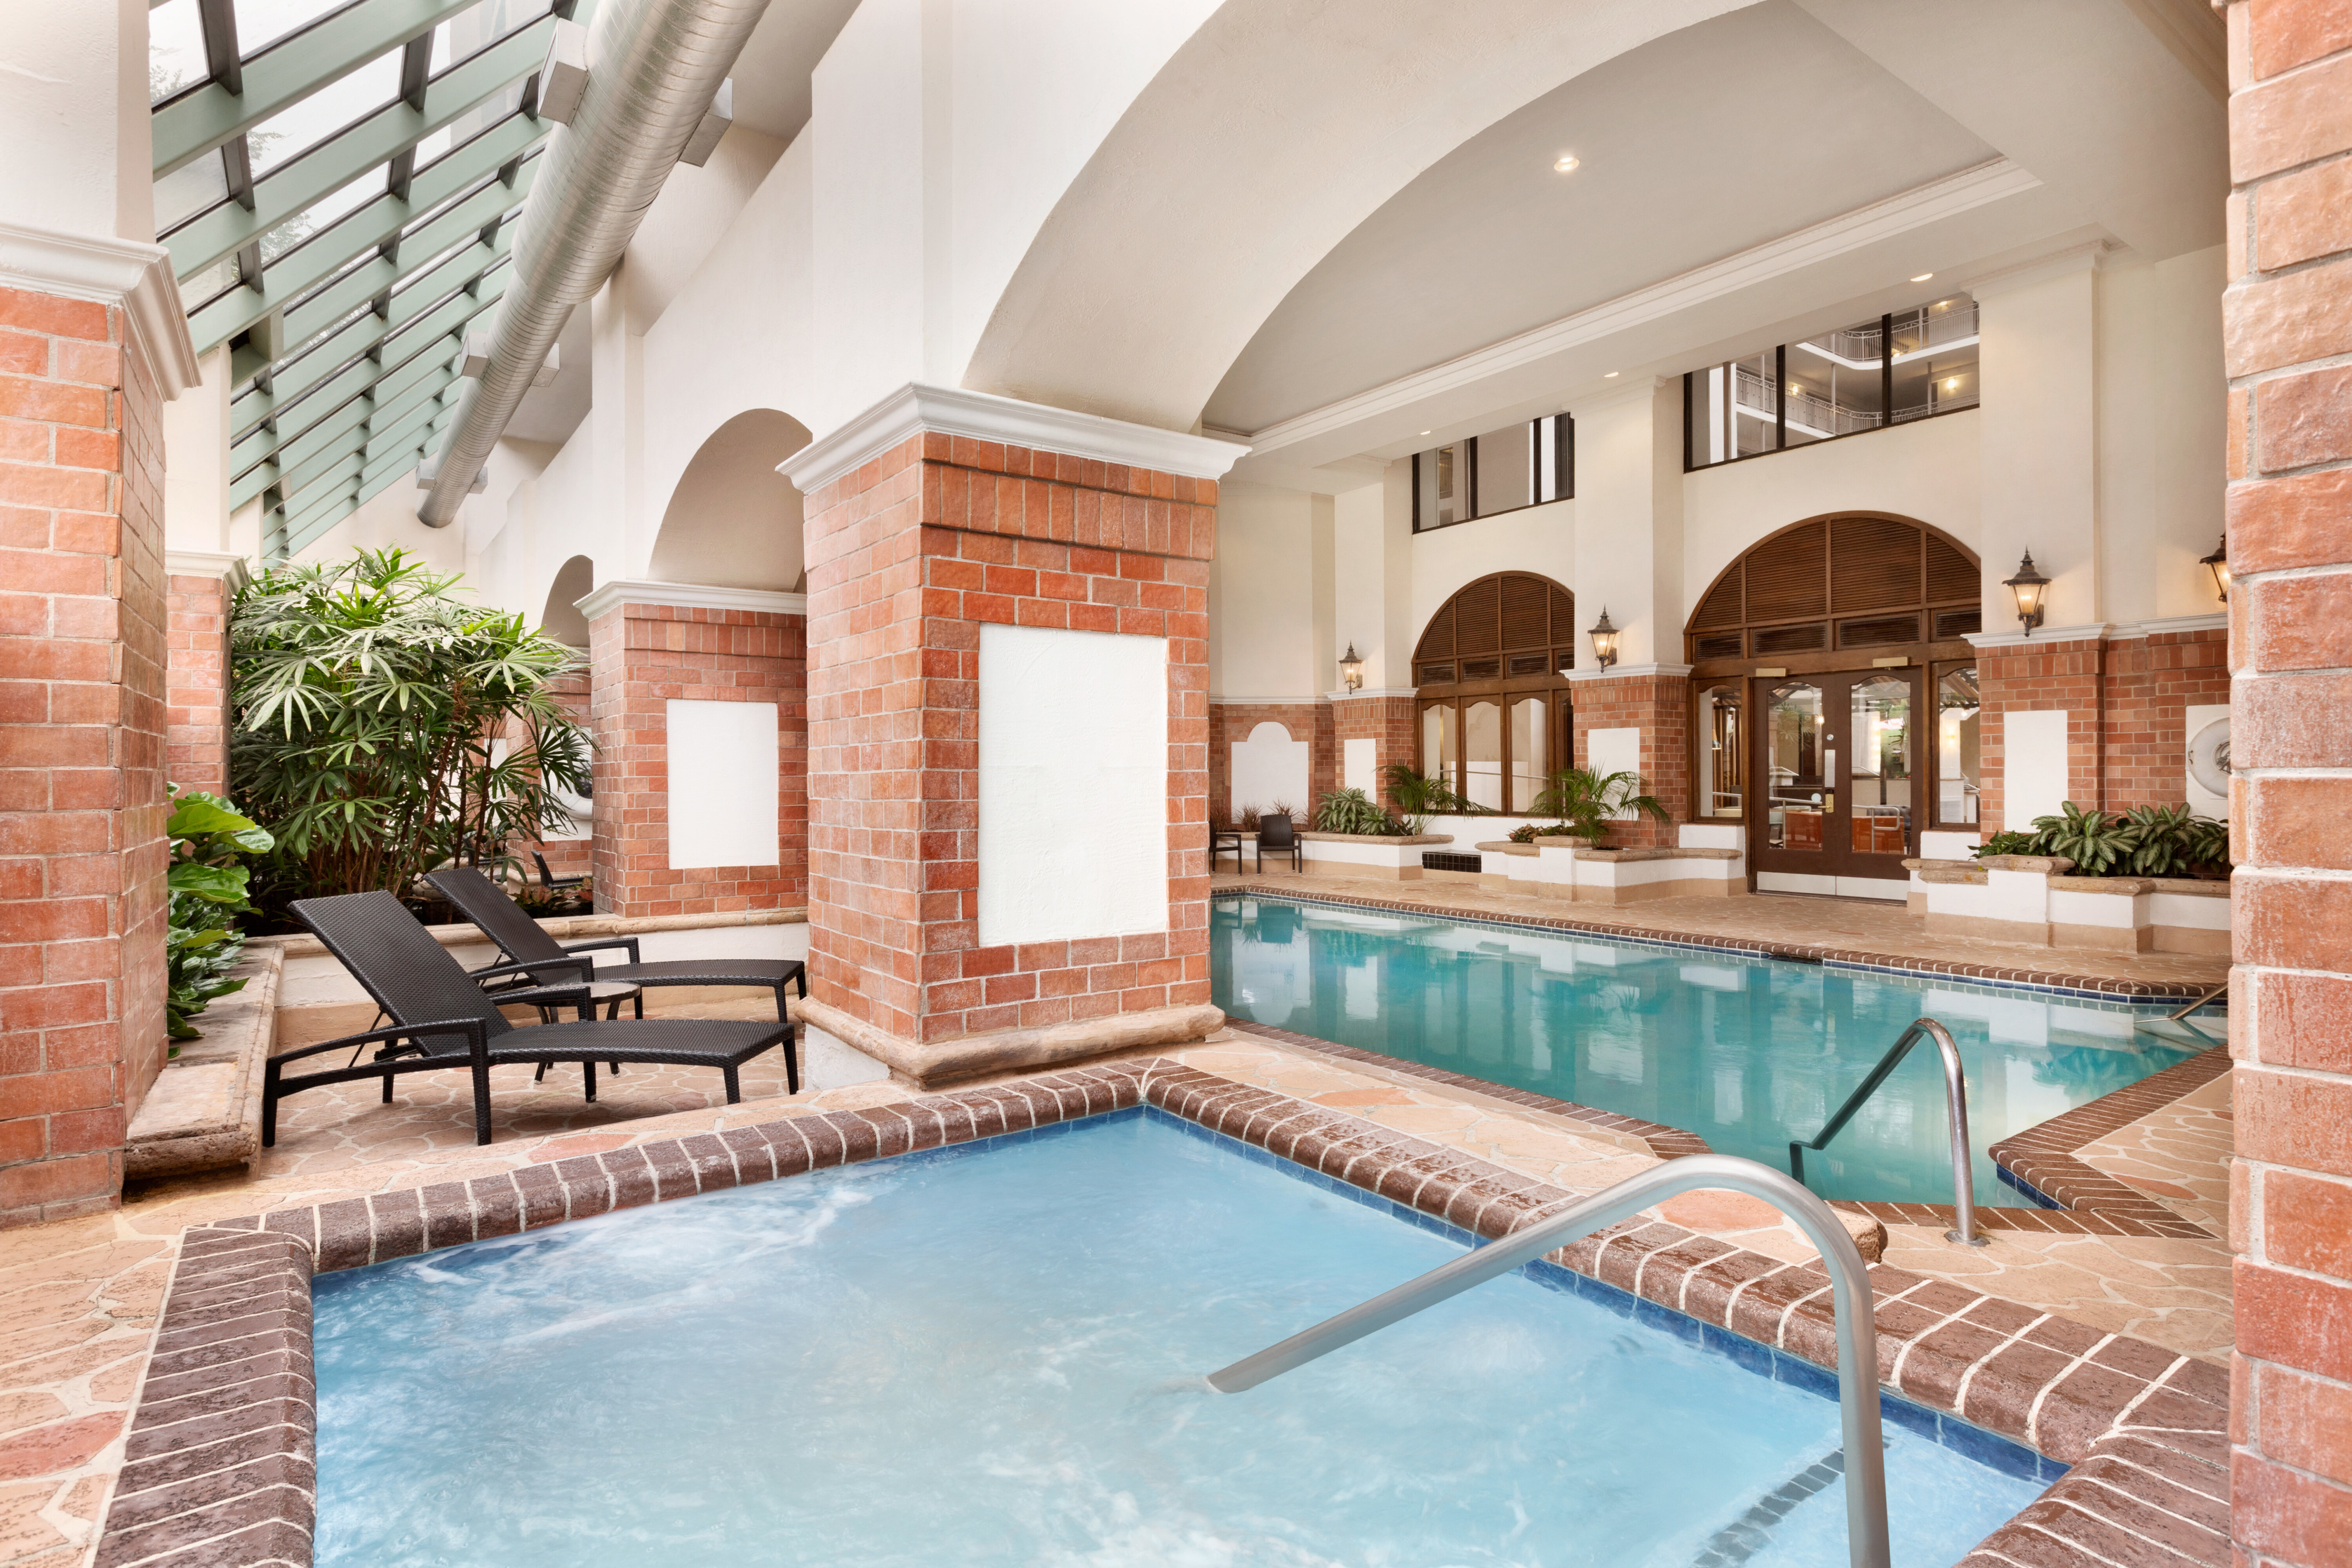 Indoor pool with hot tub